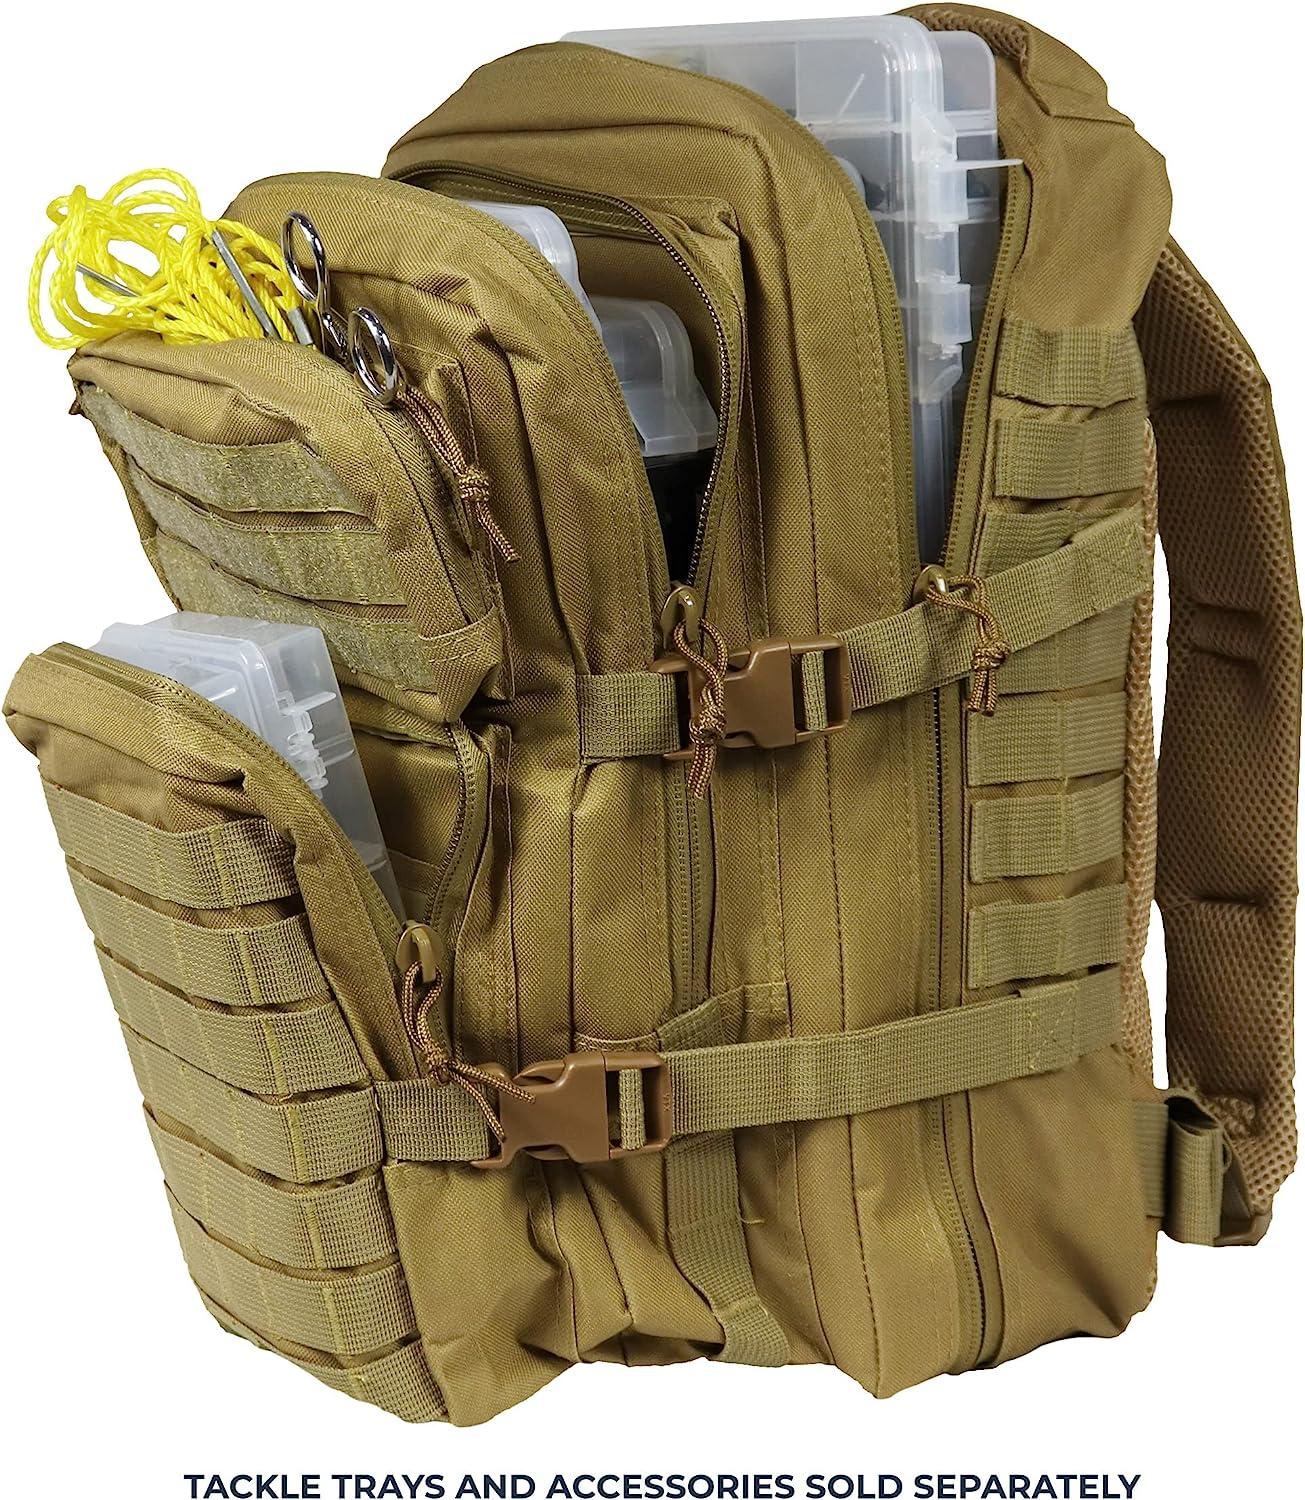 OSAGE RIVER Fishing Backpack, Fits 4 Large Tackle Boxes, MOLLE Webbing as  Rod Holder, Waterproof Rain Cover, Includes Pliers and Flashlight, Medium